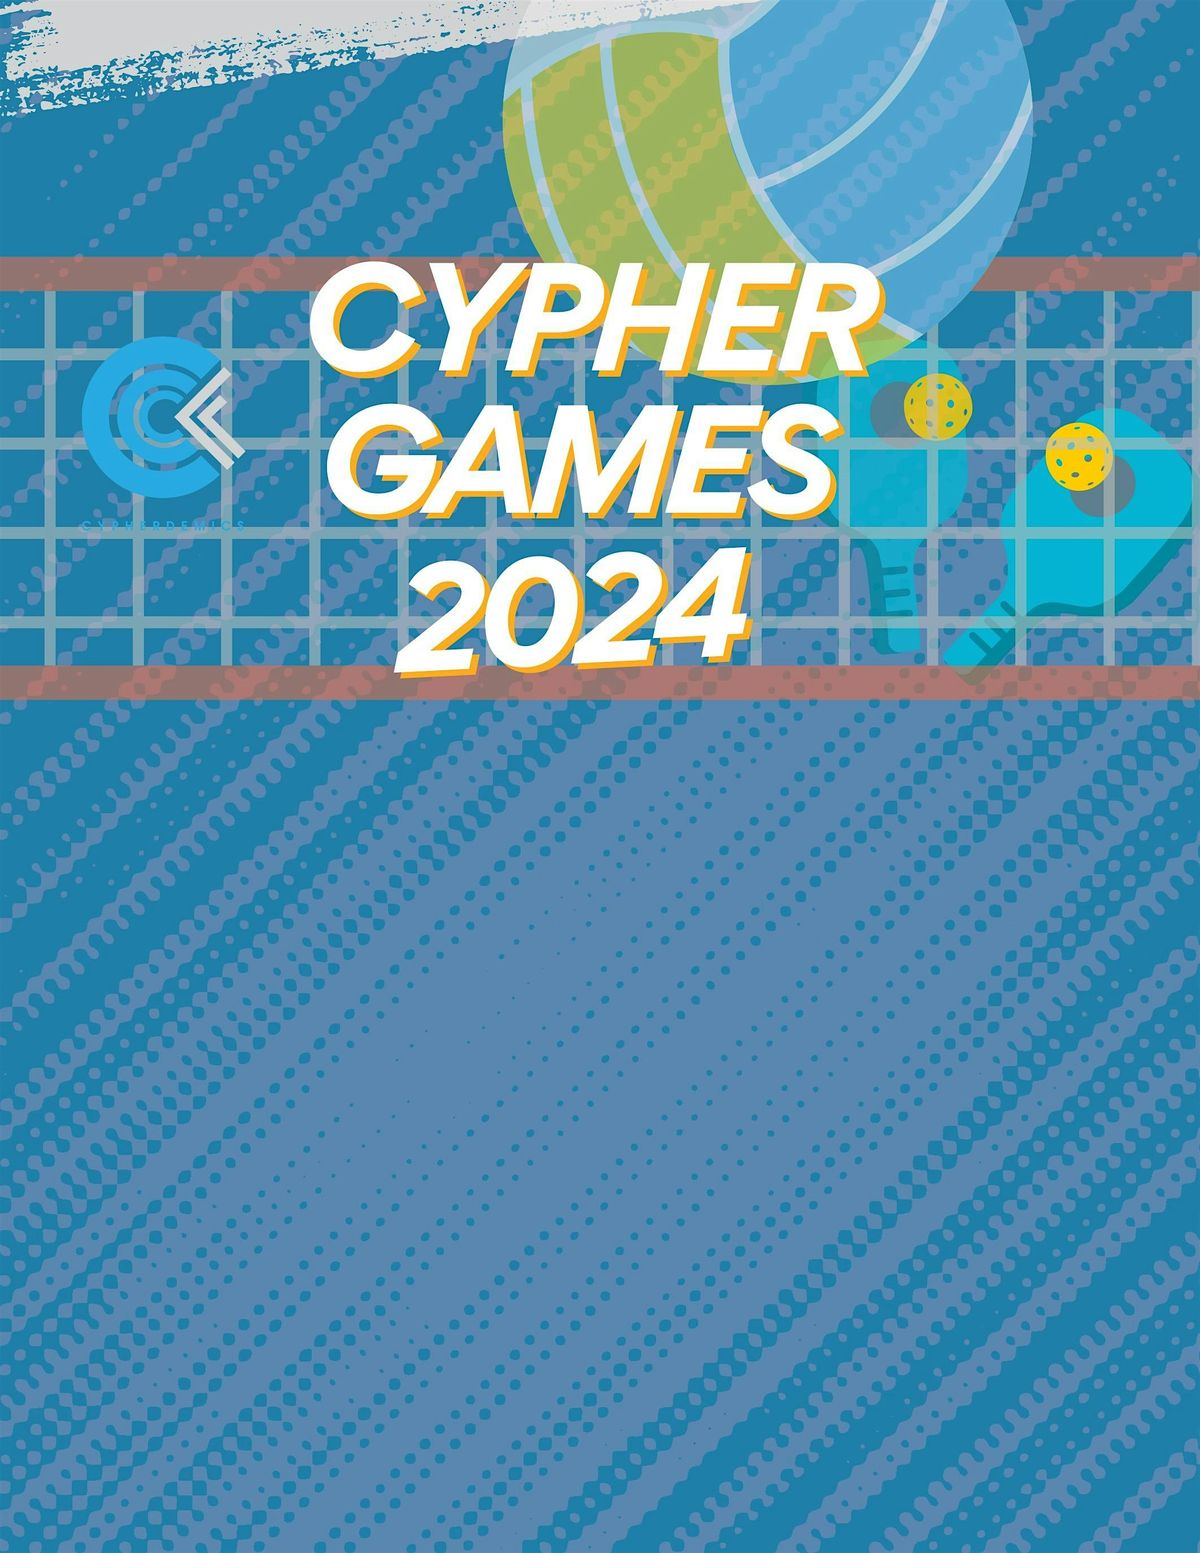 Cypher Games 2024